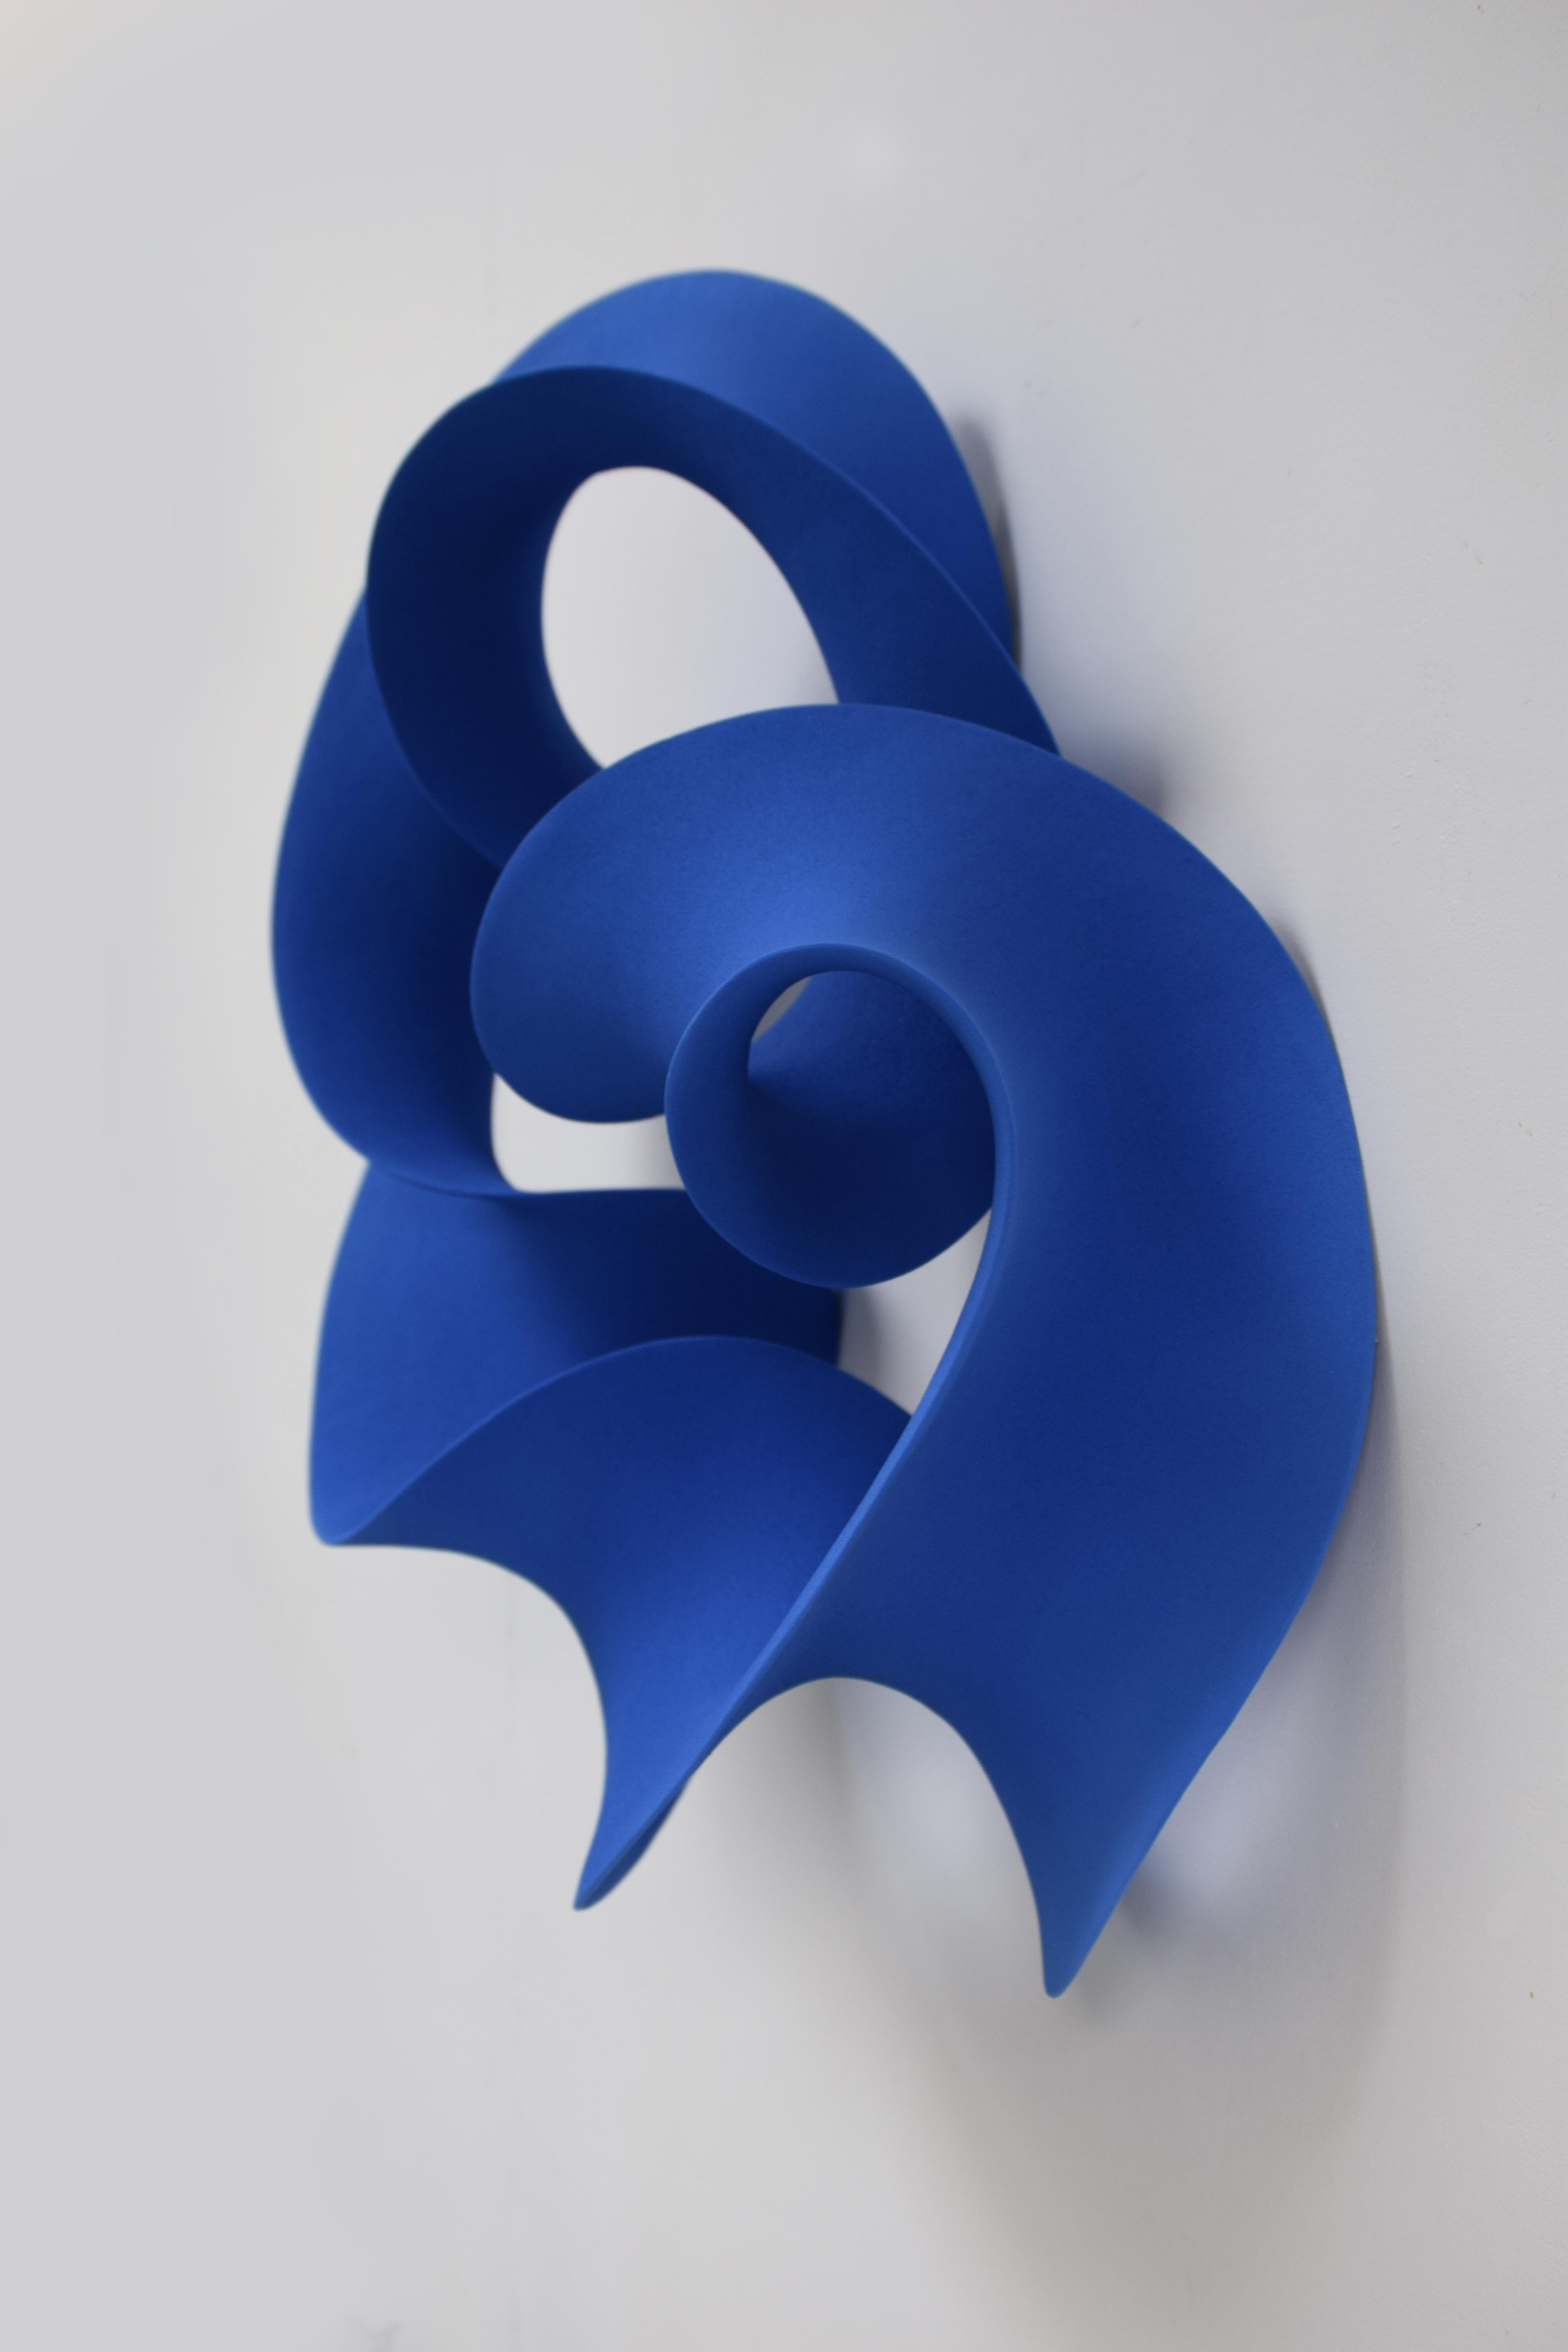 Flowing Blue, 2022 (Ceramic, C. 21.6 in. h x 20.8 in. w x 5.9 in. d, Object No.: 4113)

Merete works with abstract sculptural form and is interested in the way one defines and comprehends space through physical form. Her ceramic creations represent